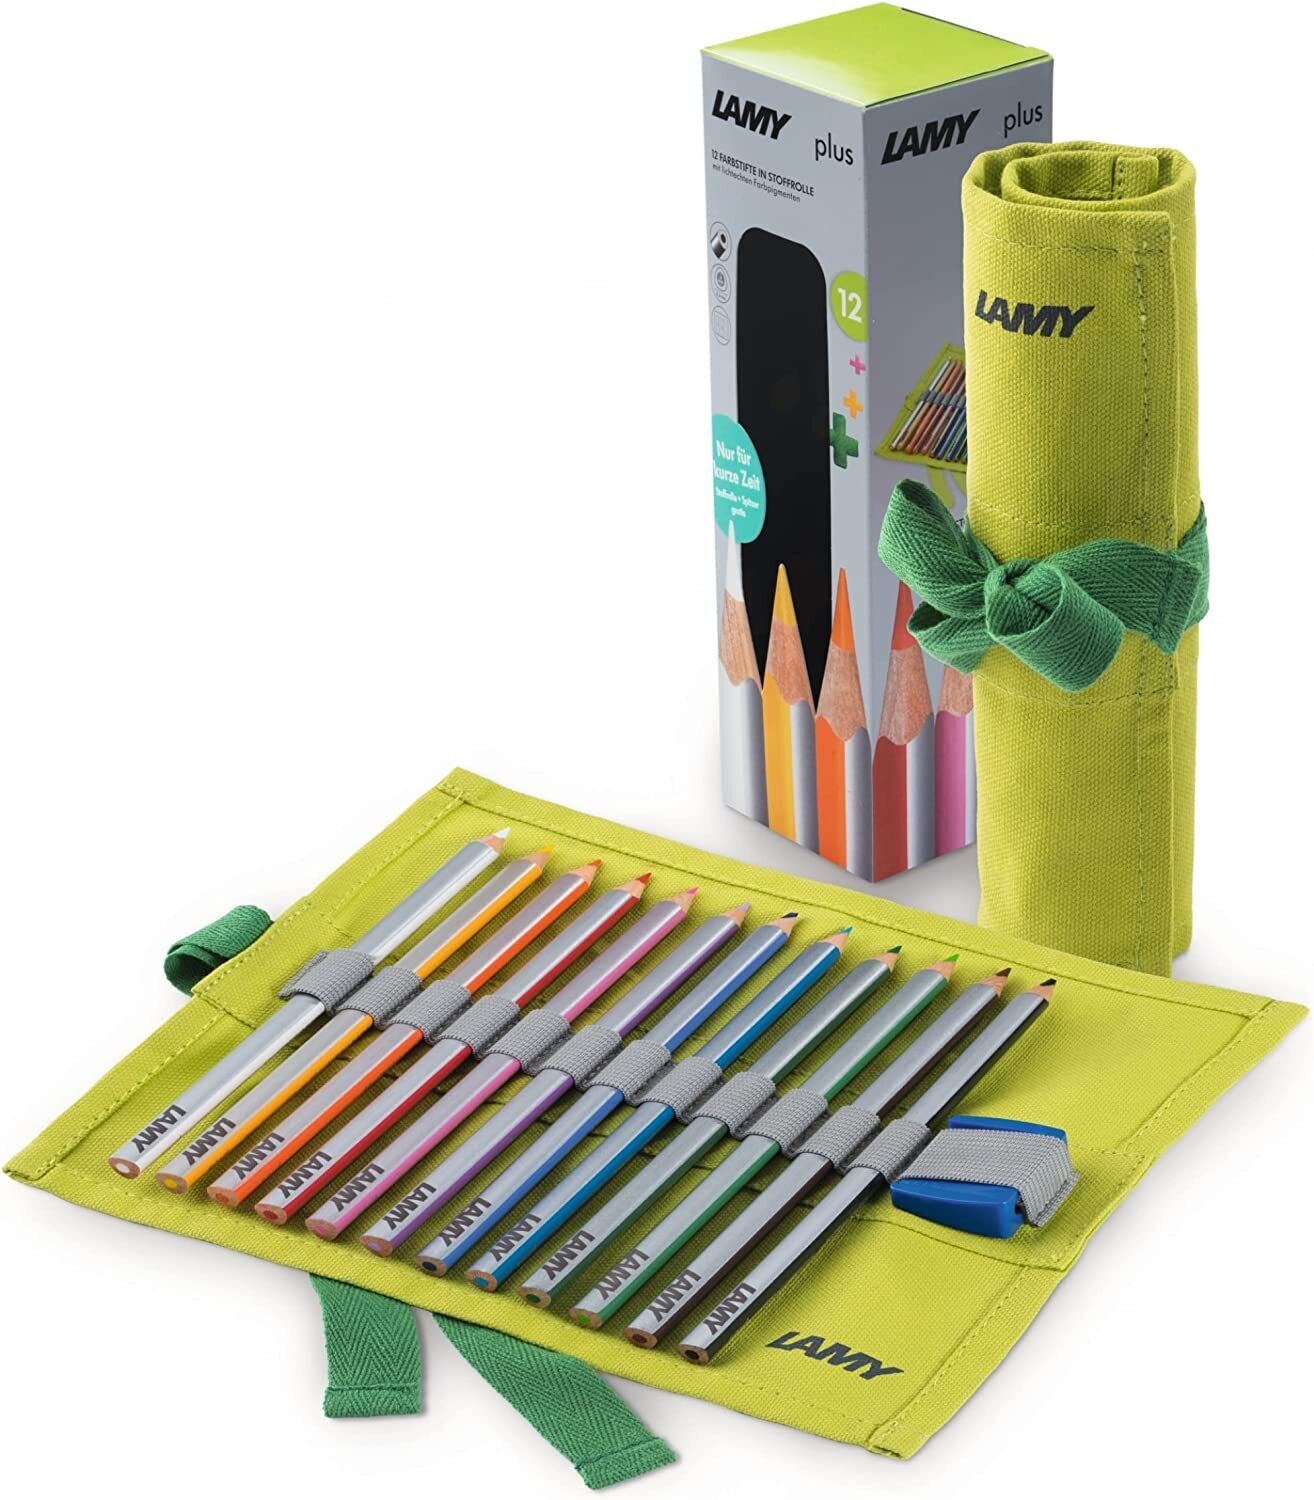 Lamy 4plus Colored Pencils and Sharpener Set - STWD.us